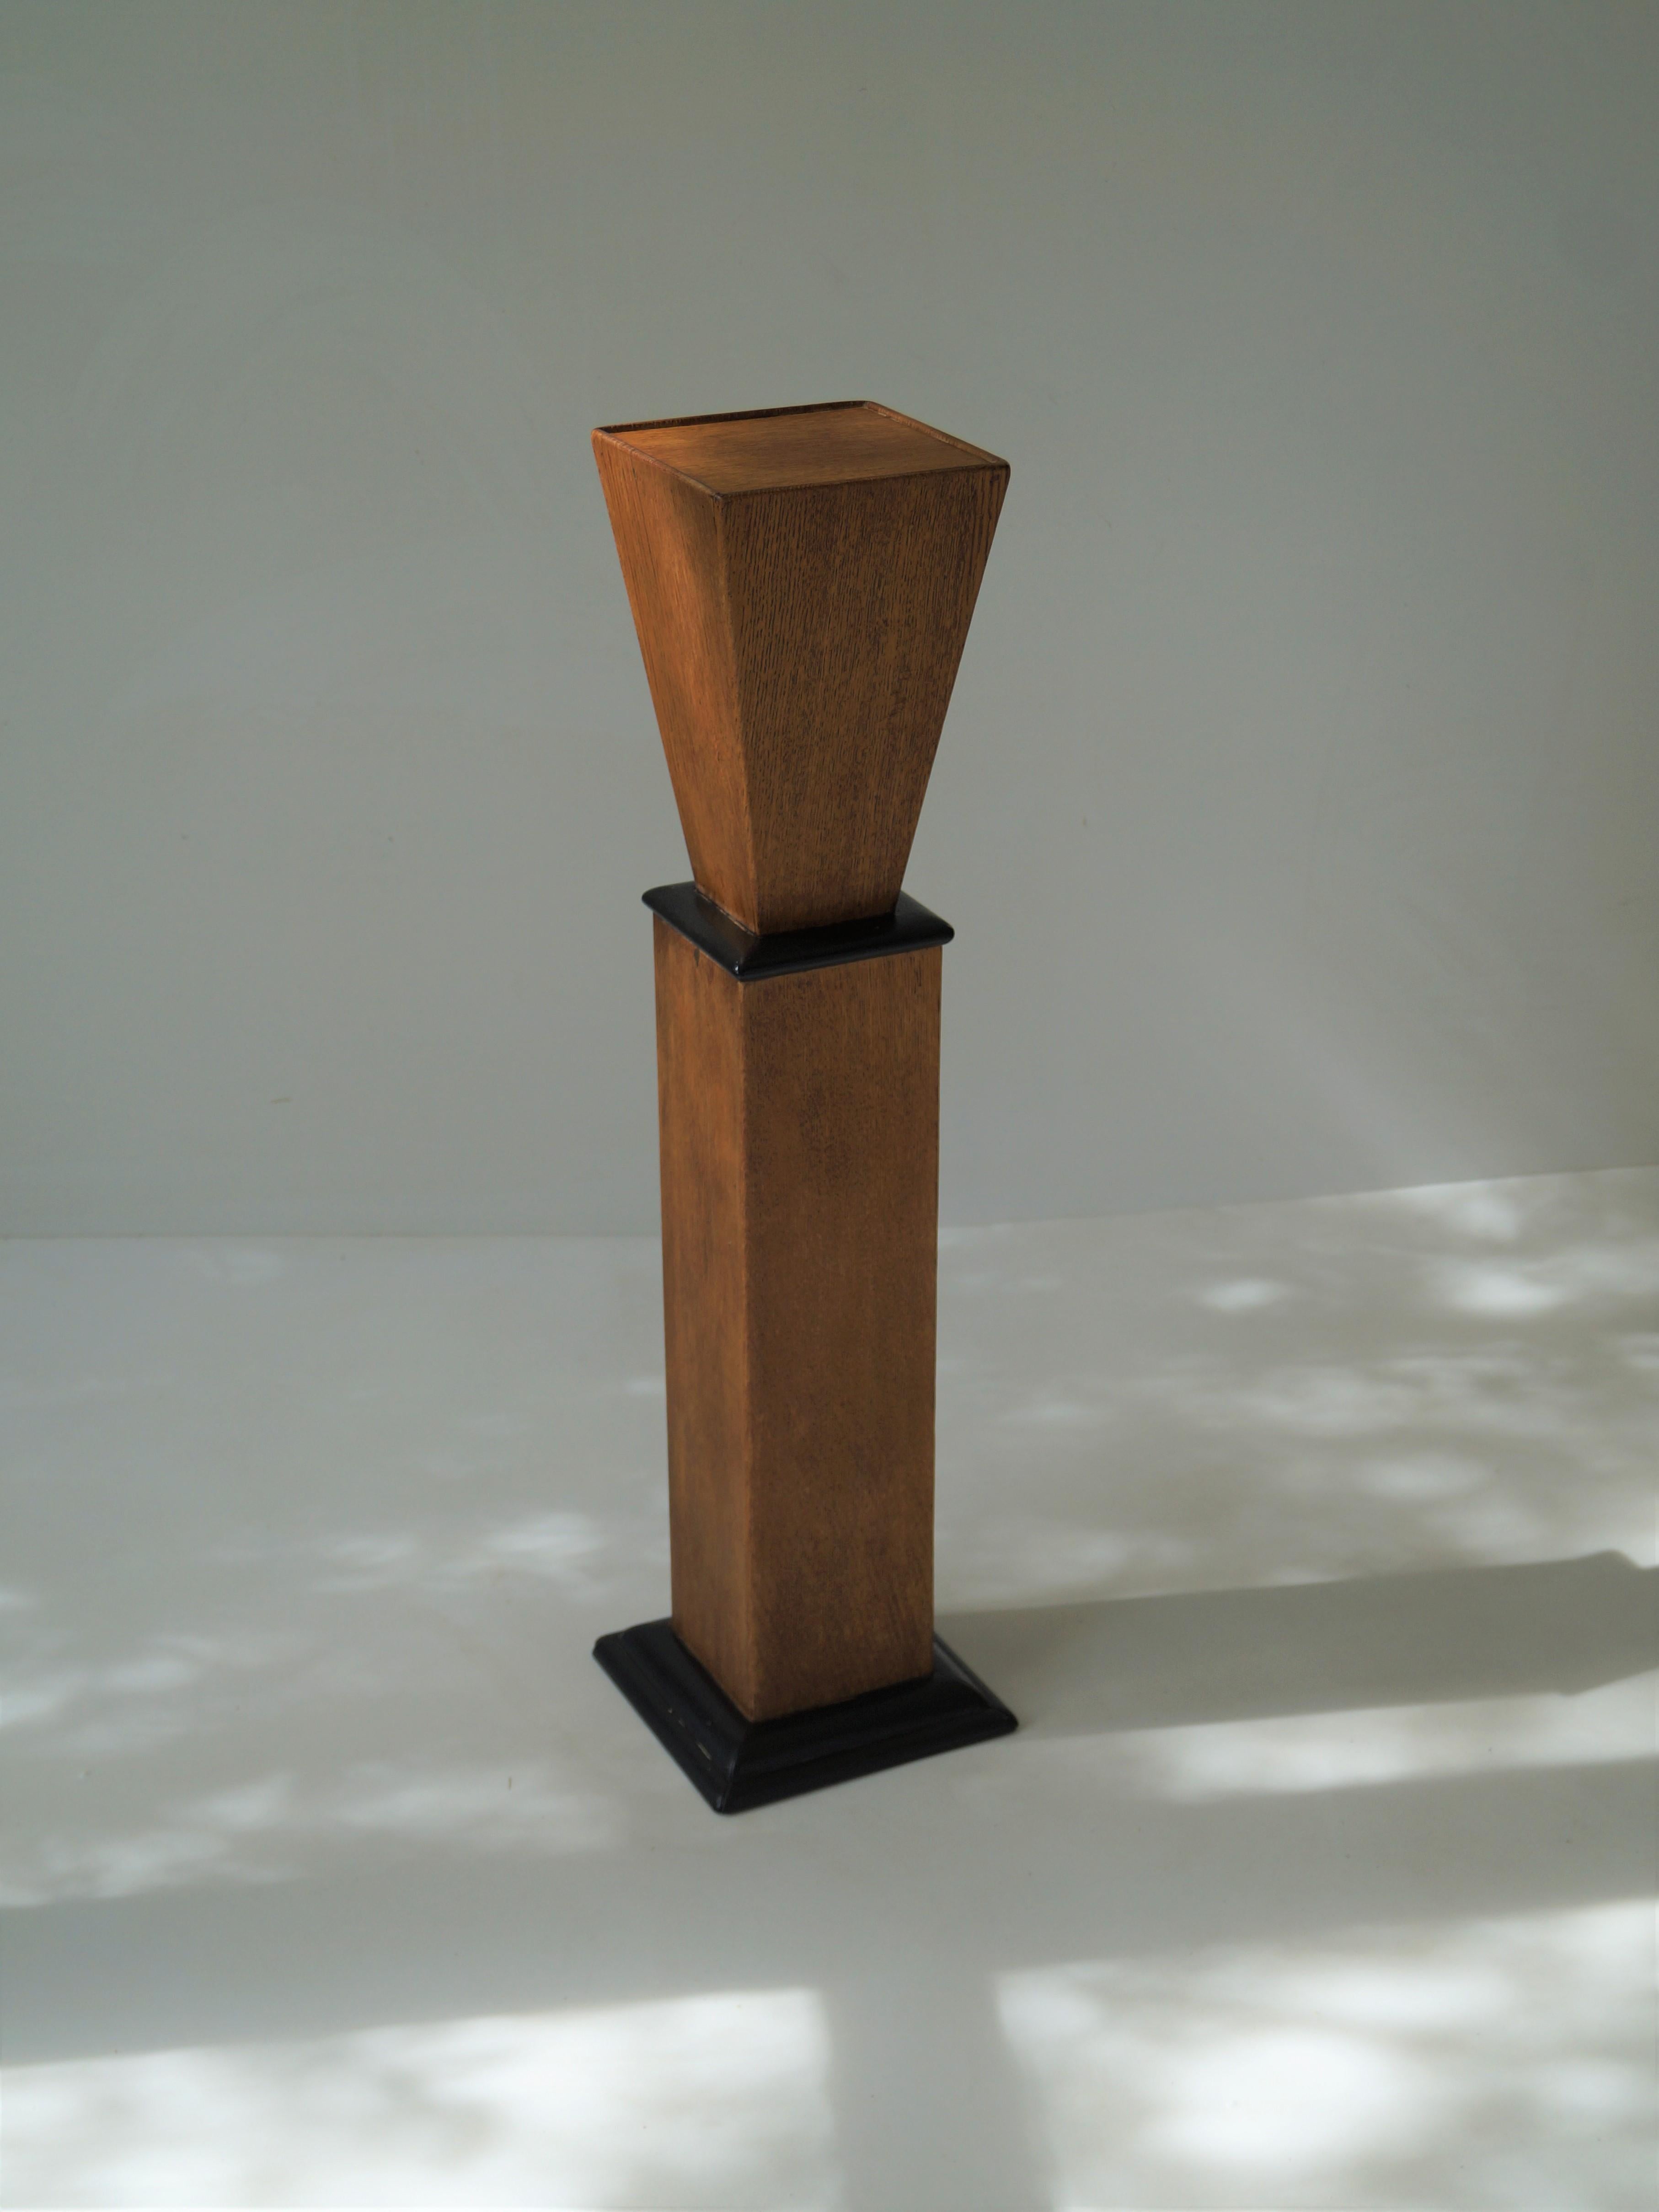 Dutch Haagse School 1920s plinth, column or pedestal in style of P.E.L. Izeren (Famous designer for ''De Genneper Molen''). Rare modernist design. These kind of columns are hard to come by and very sought after by interior designers. Perfect as a